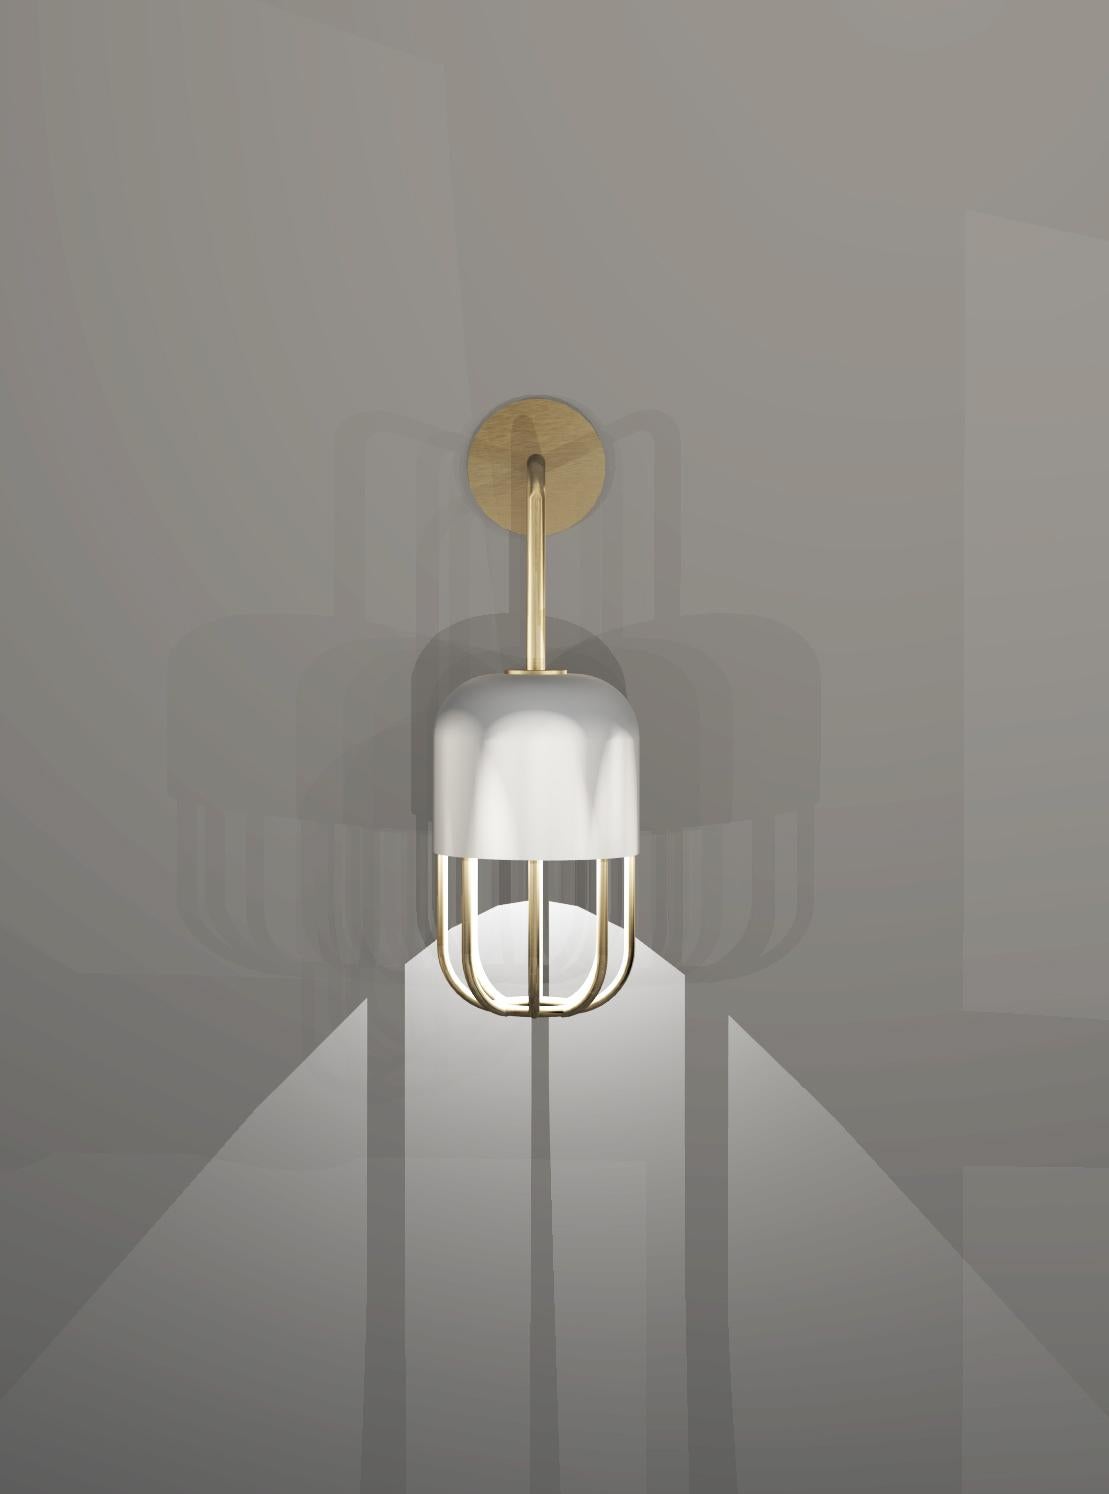 This wall light has a bold design that uses symmetry between the outer casing and the frame of a capsule shape. The soft glow of opal glass is elegantly supported and highlighted by a beautiful brushed brass structure.
Metalwork can be powder-coated